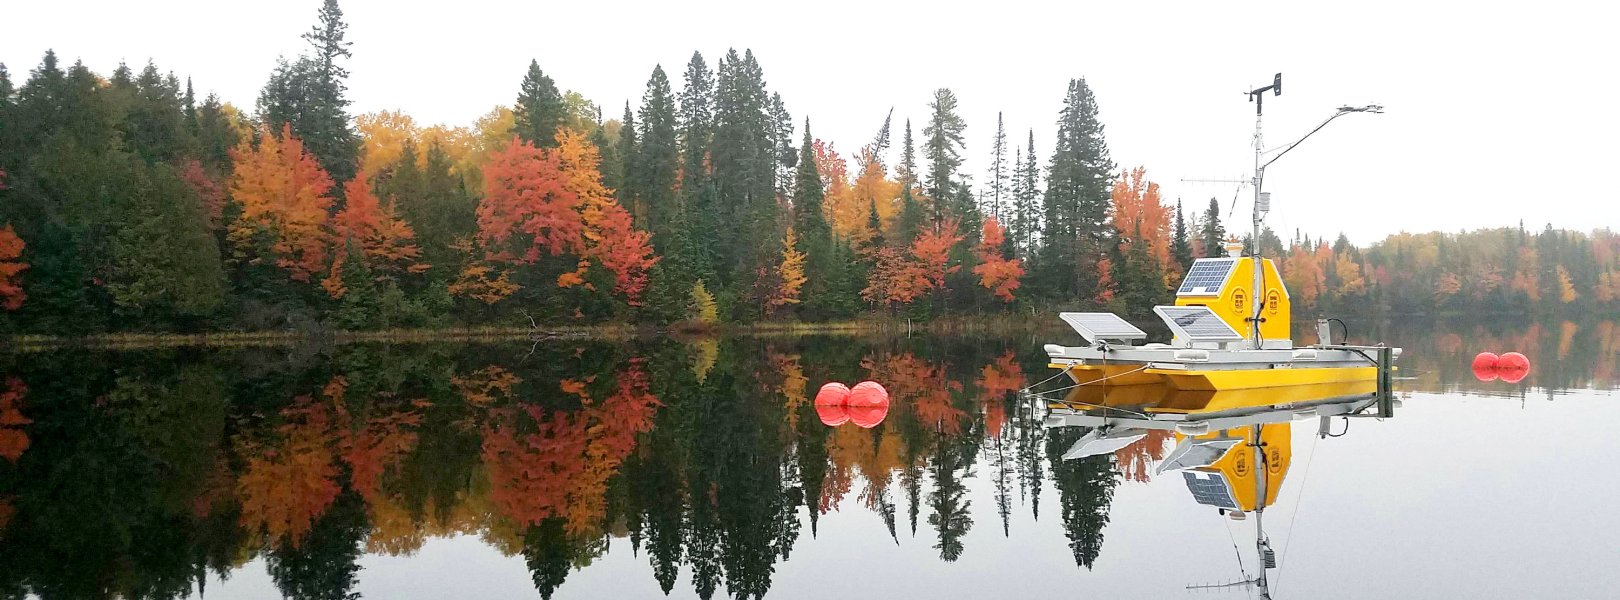 A bouy on the CRAM lake site in the fall